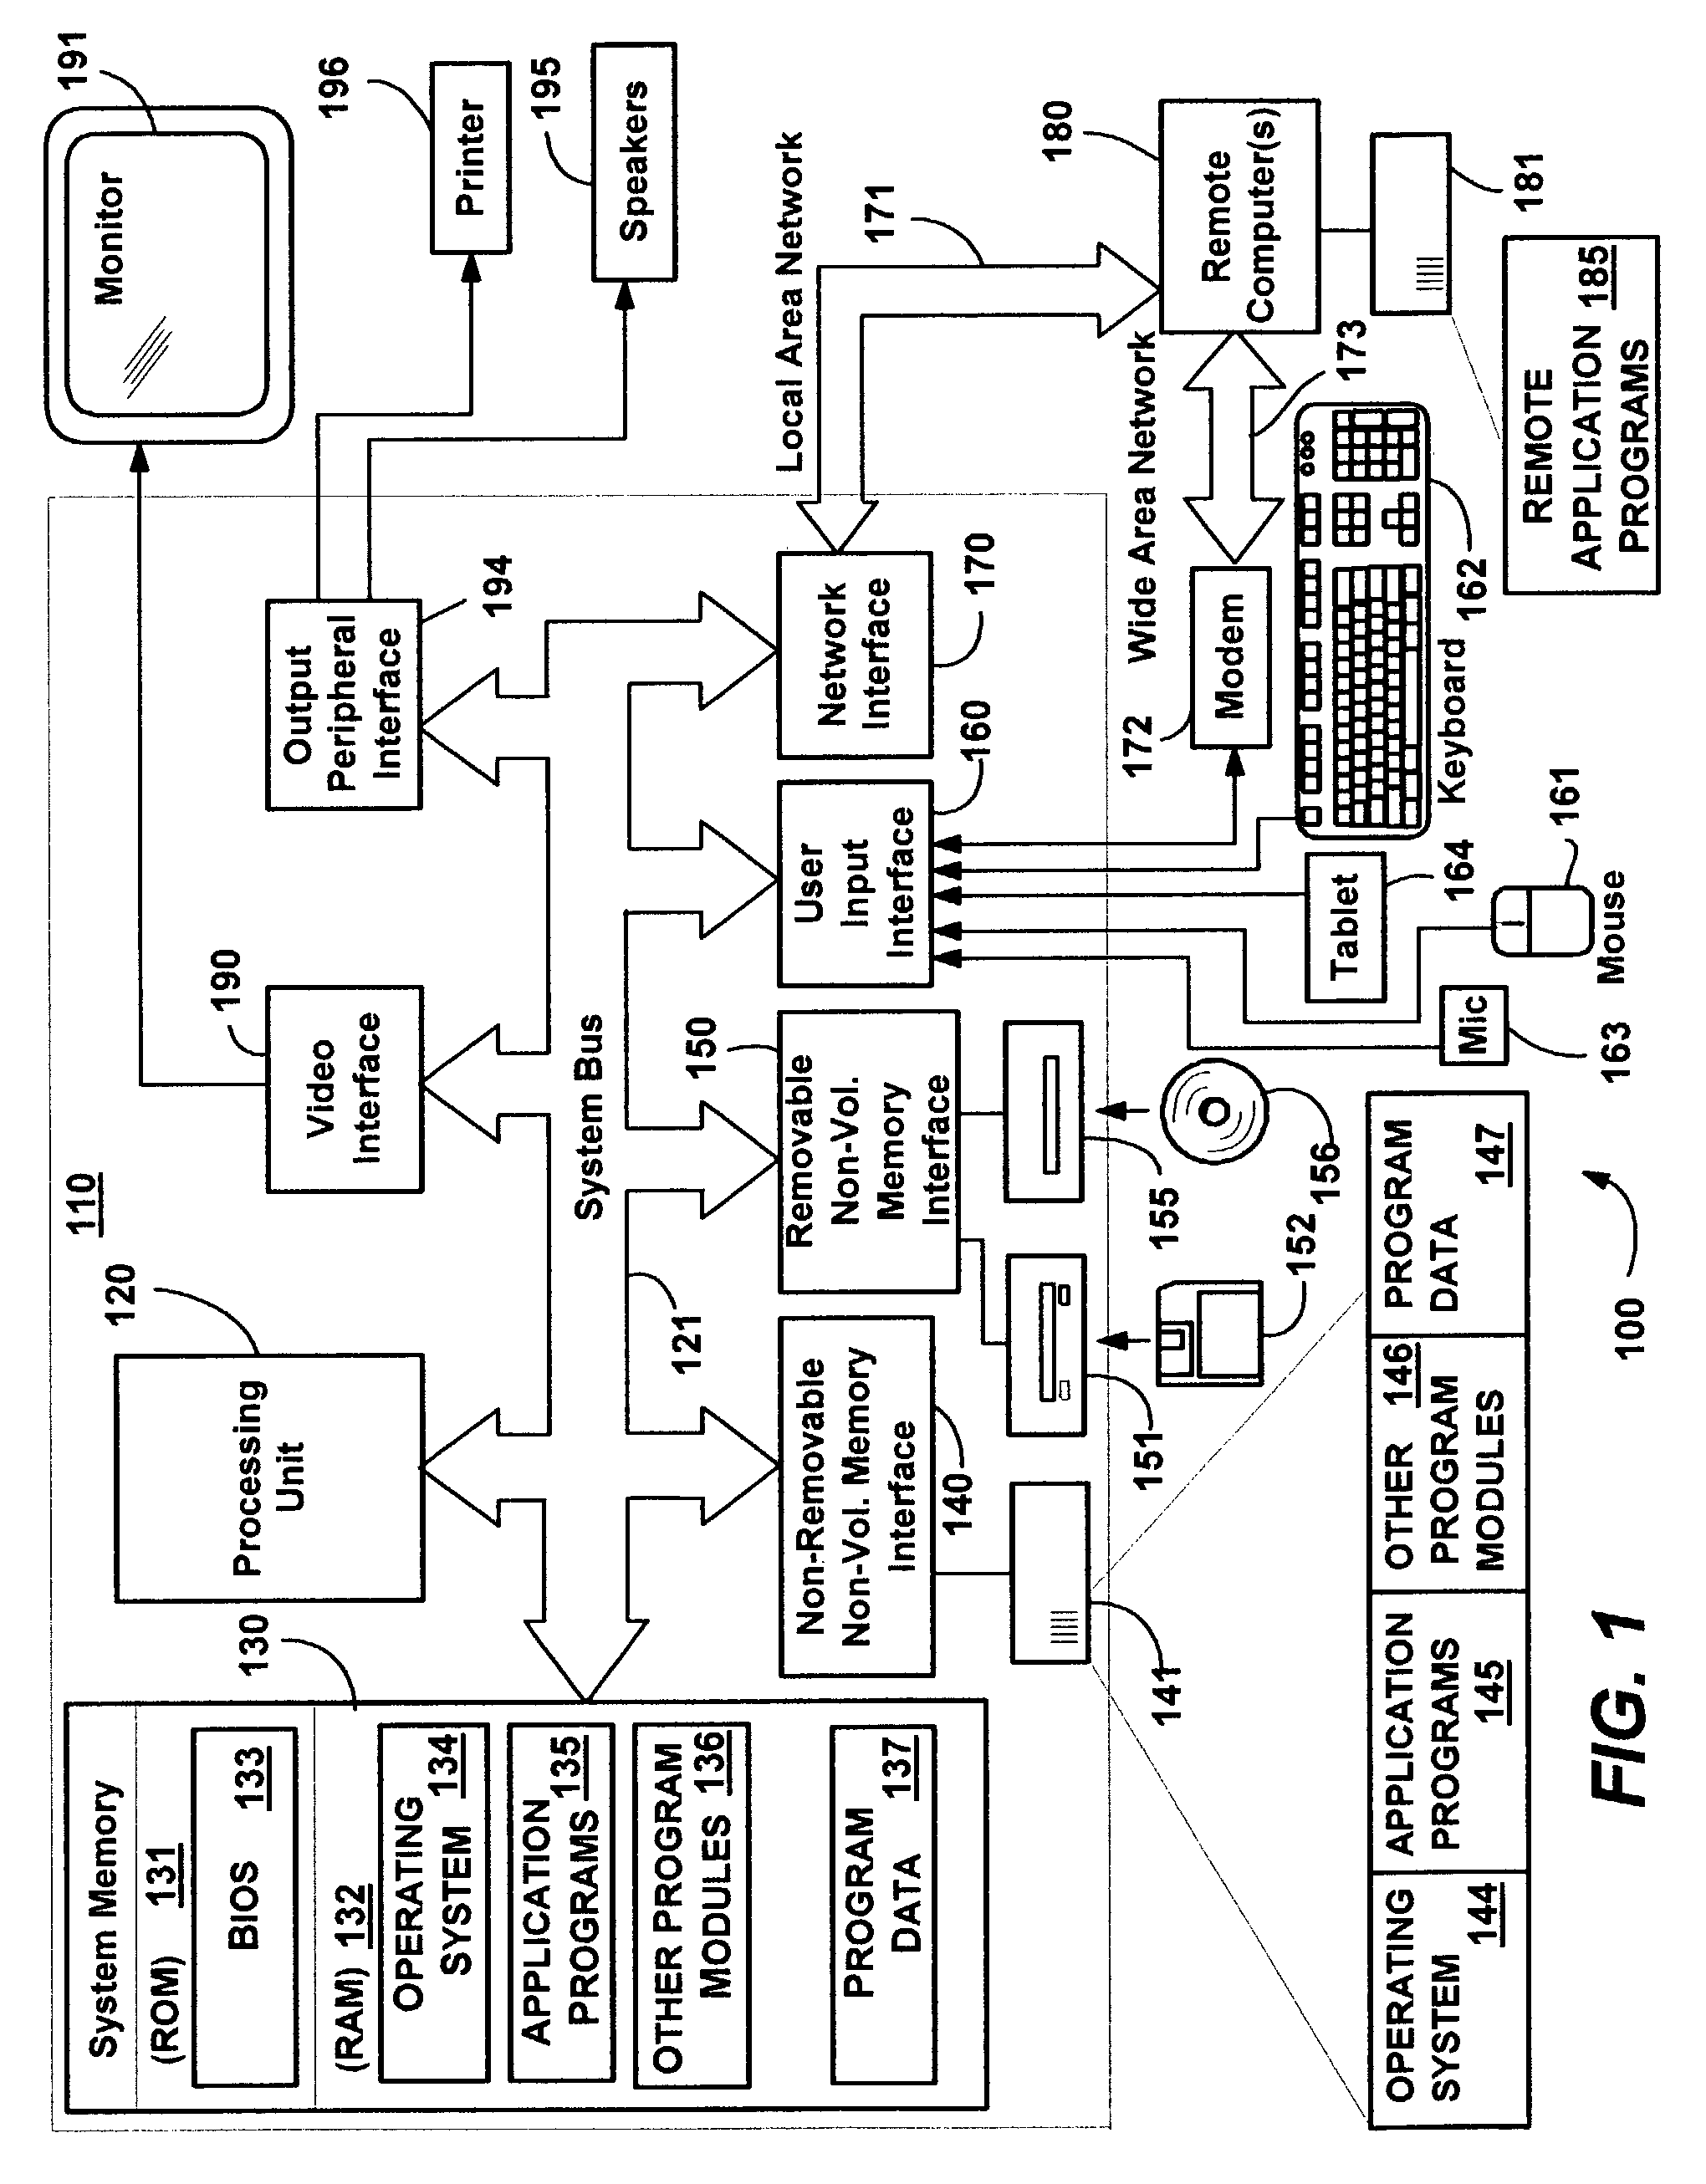 Method and system for representing group policy object topology and relationships